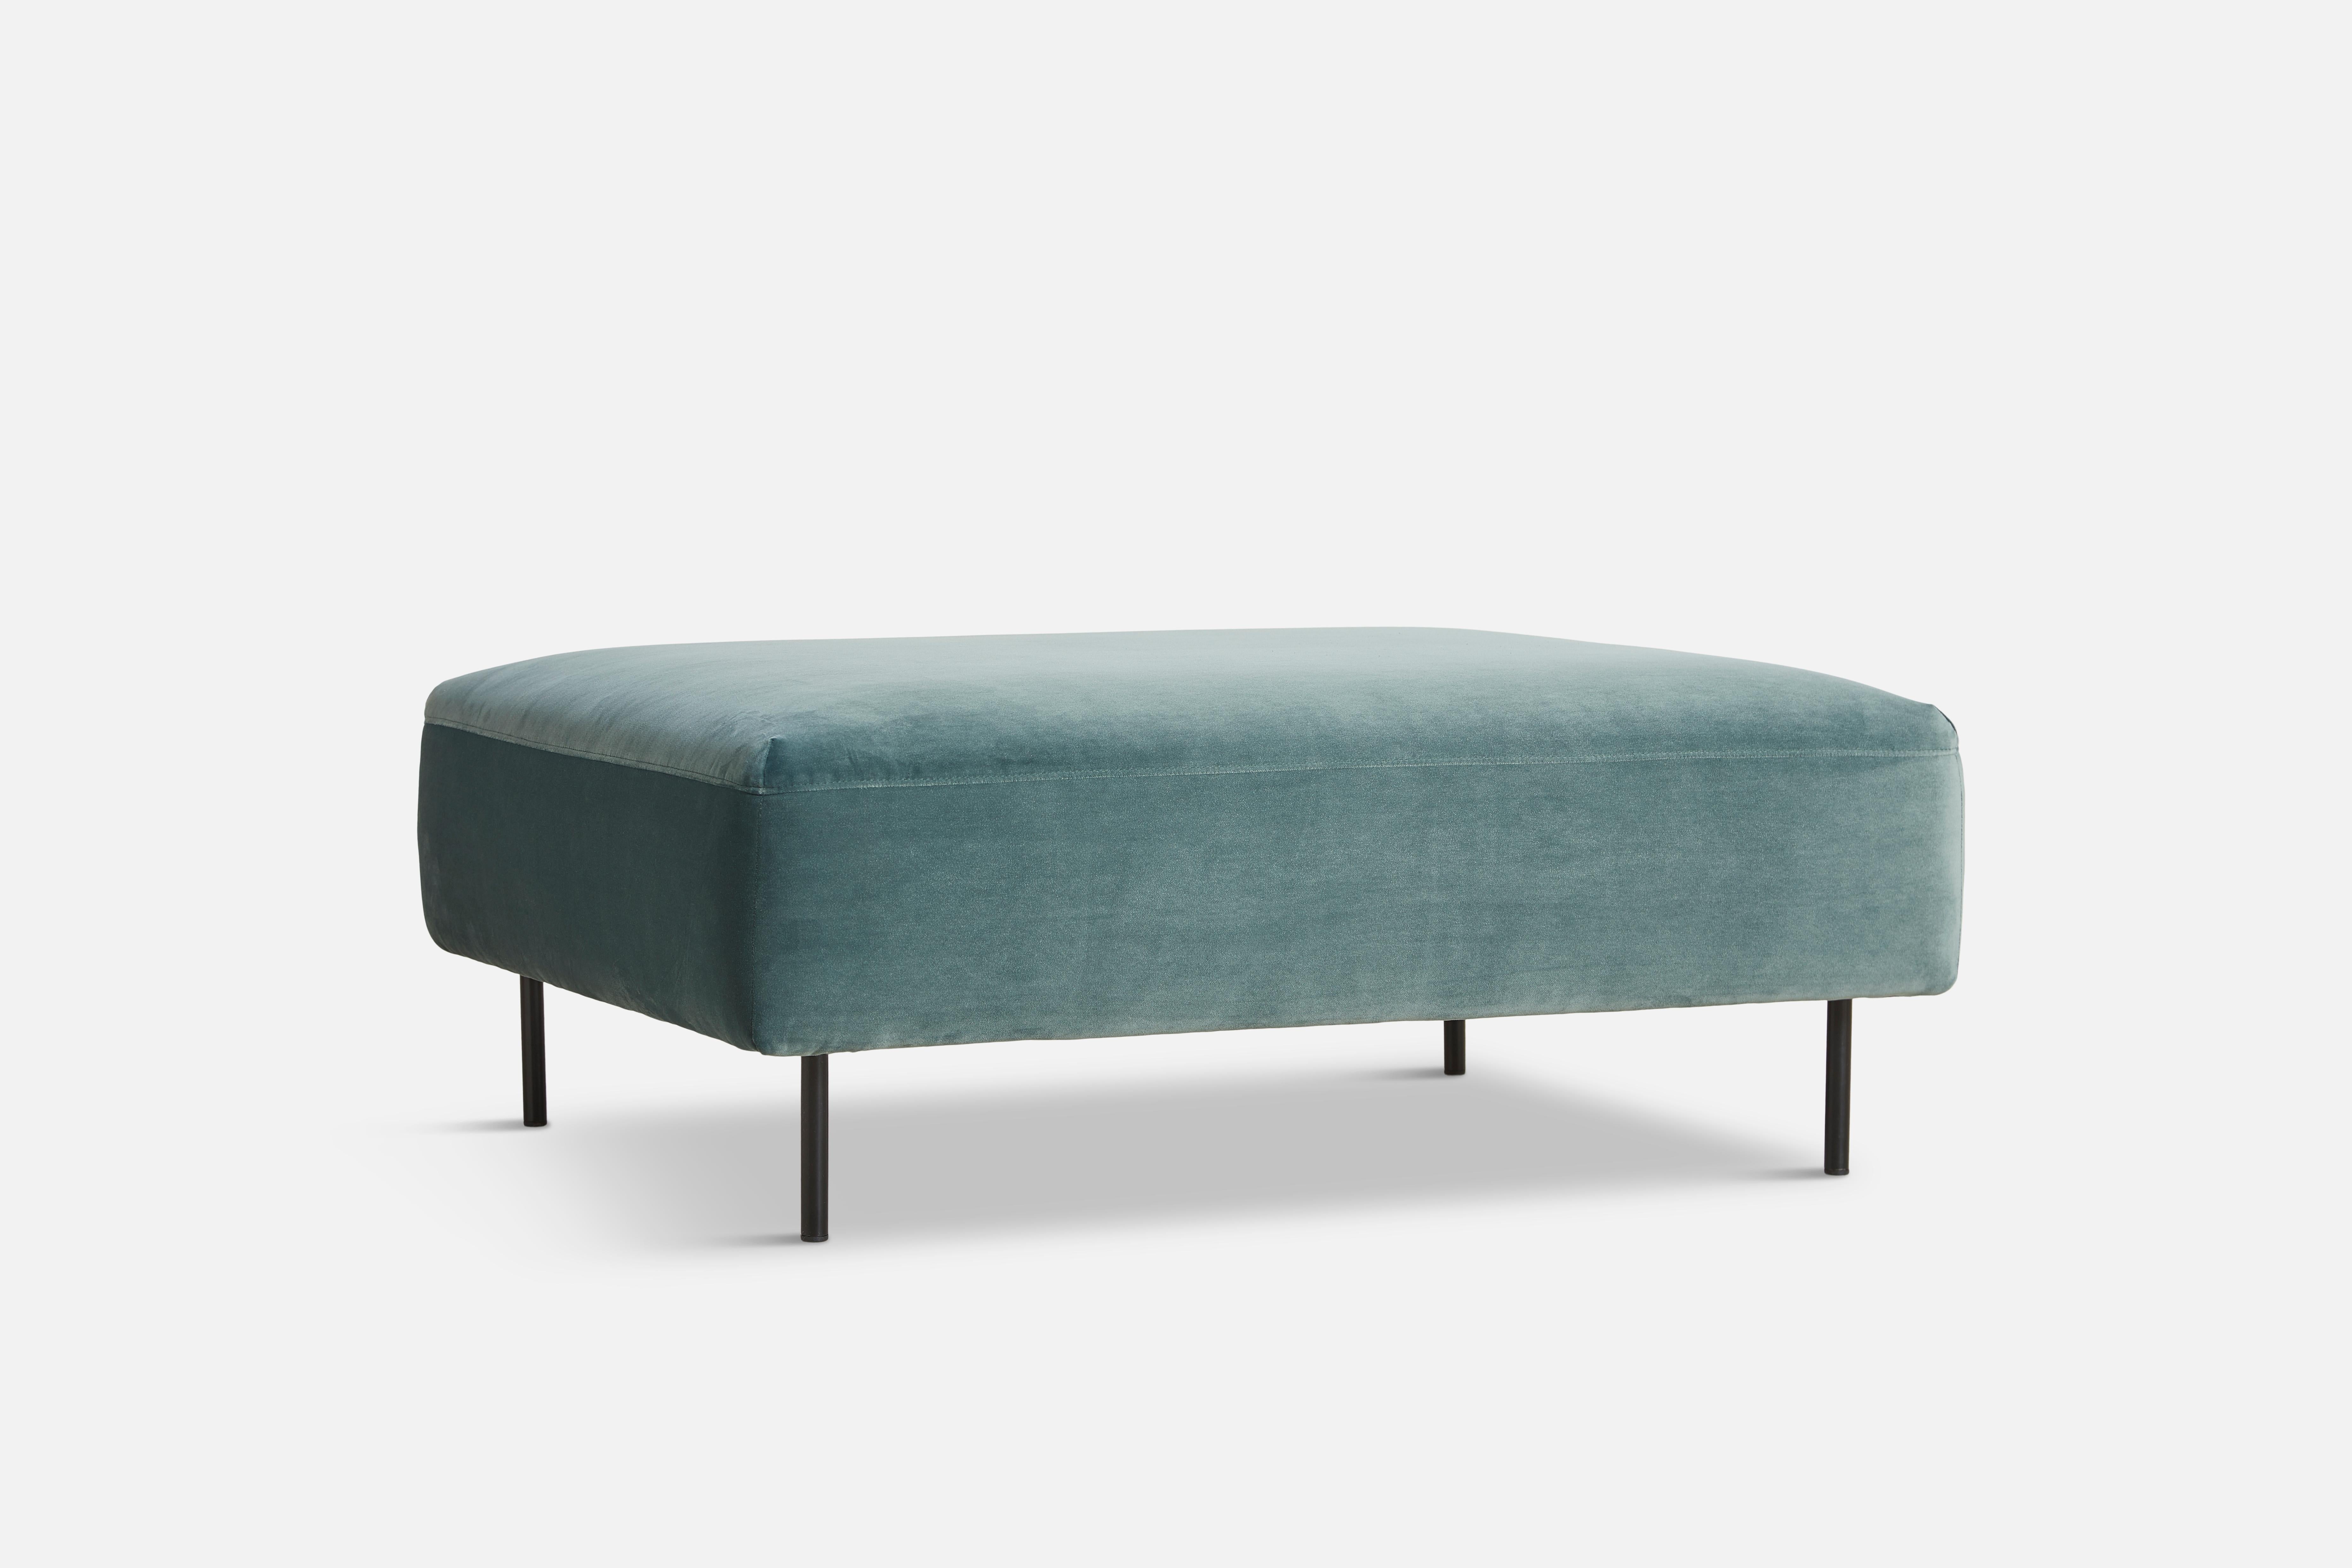 Collar ottoman pine by Meike Harde
Materials: Plywood, metal, foam, elastic belts, fabric (Nevotex Icon, 1375 Pine)
Dimensions: D 87.5 x W 106.5 x H 40 cm
Also available in different colours and materials. 

The founders, Mia and Torben Koed,